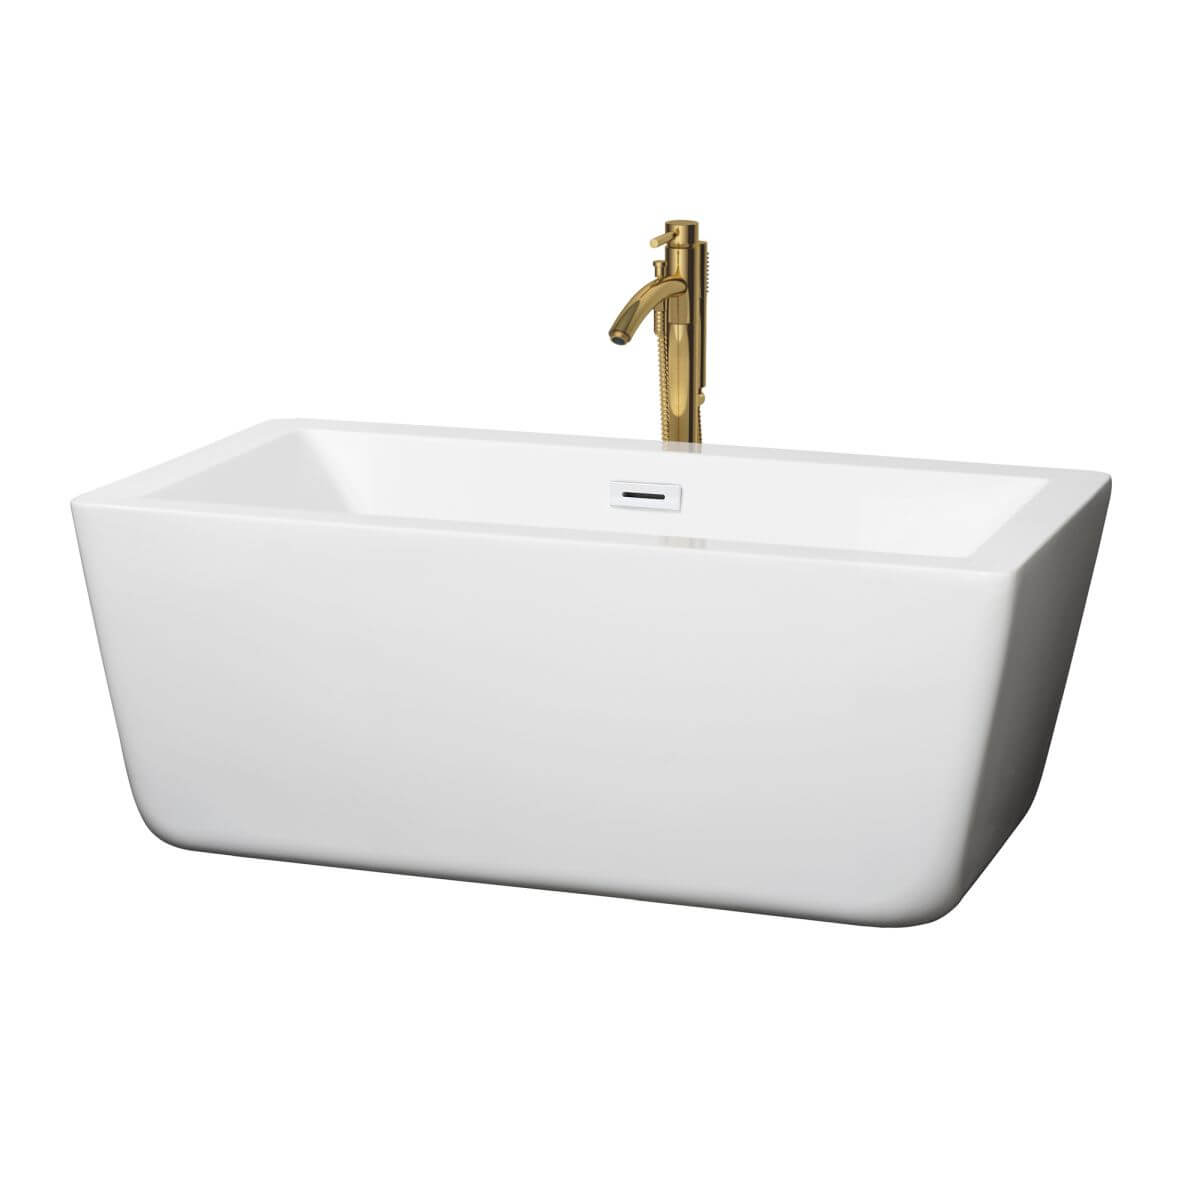 Wyndham Collection Laura 59 inch Freestanding Bathtub in White with Shiny White Trim and Floor Mounted Faucet in Brushed Gold - WCOBT100559SWATPGD